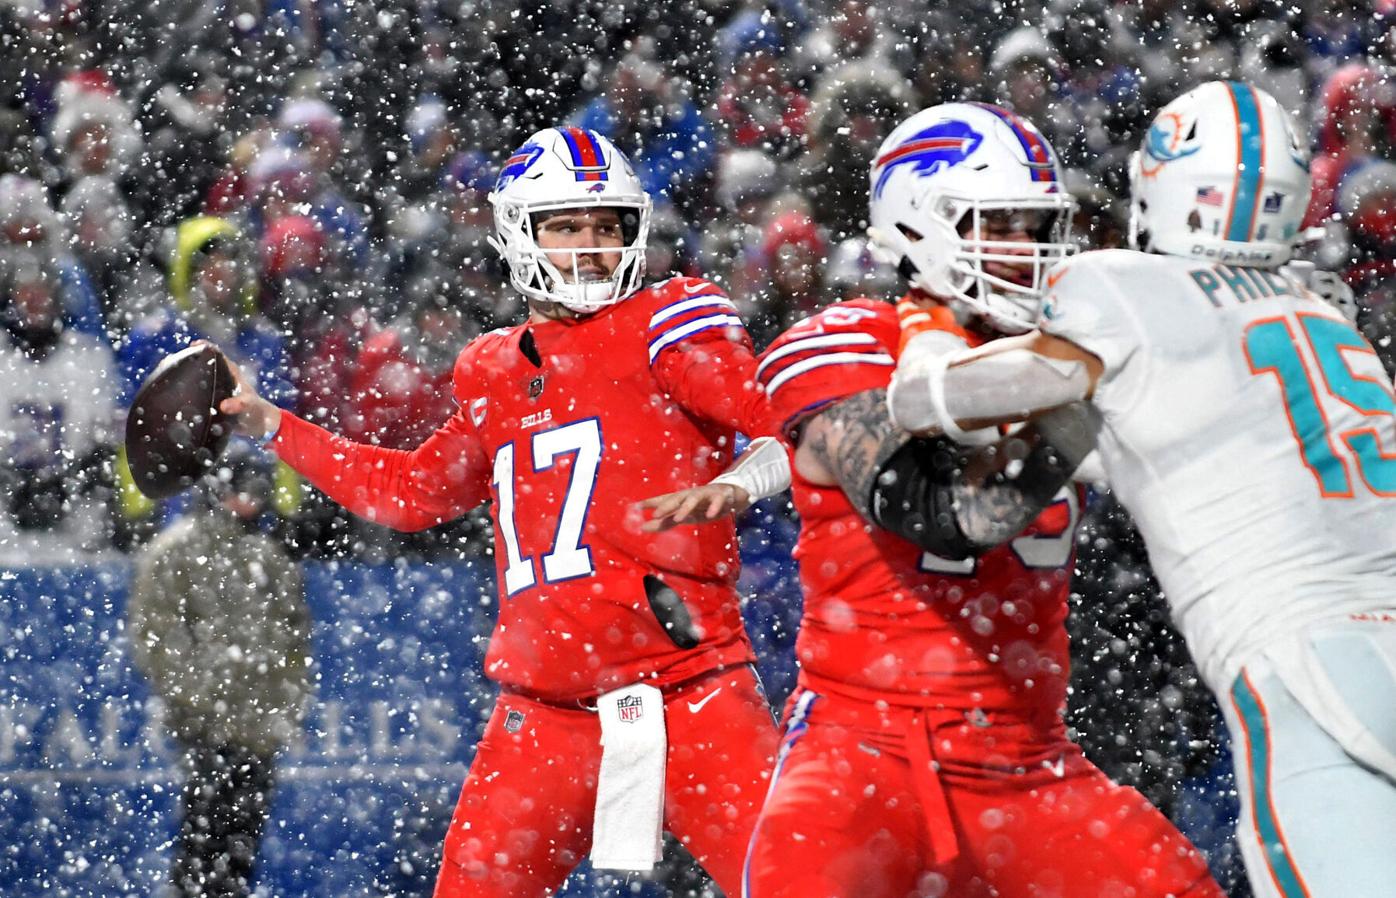 Bills clinch 2022 AFC playoff berth with win over Dolphins